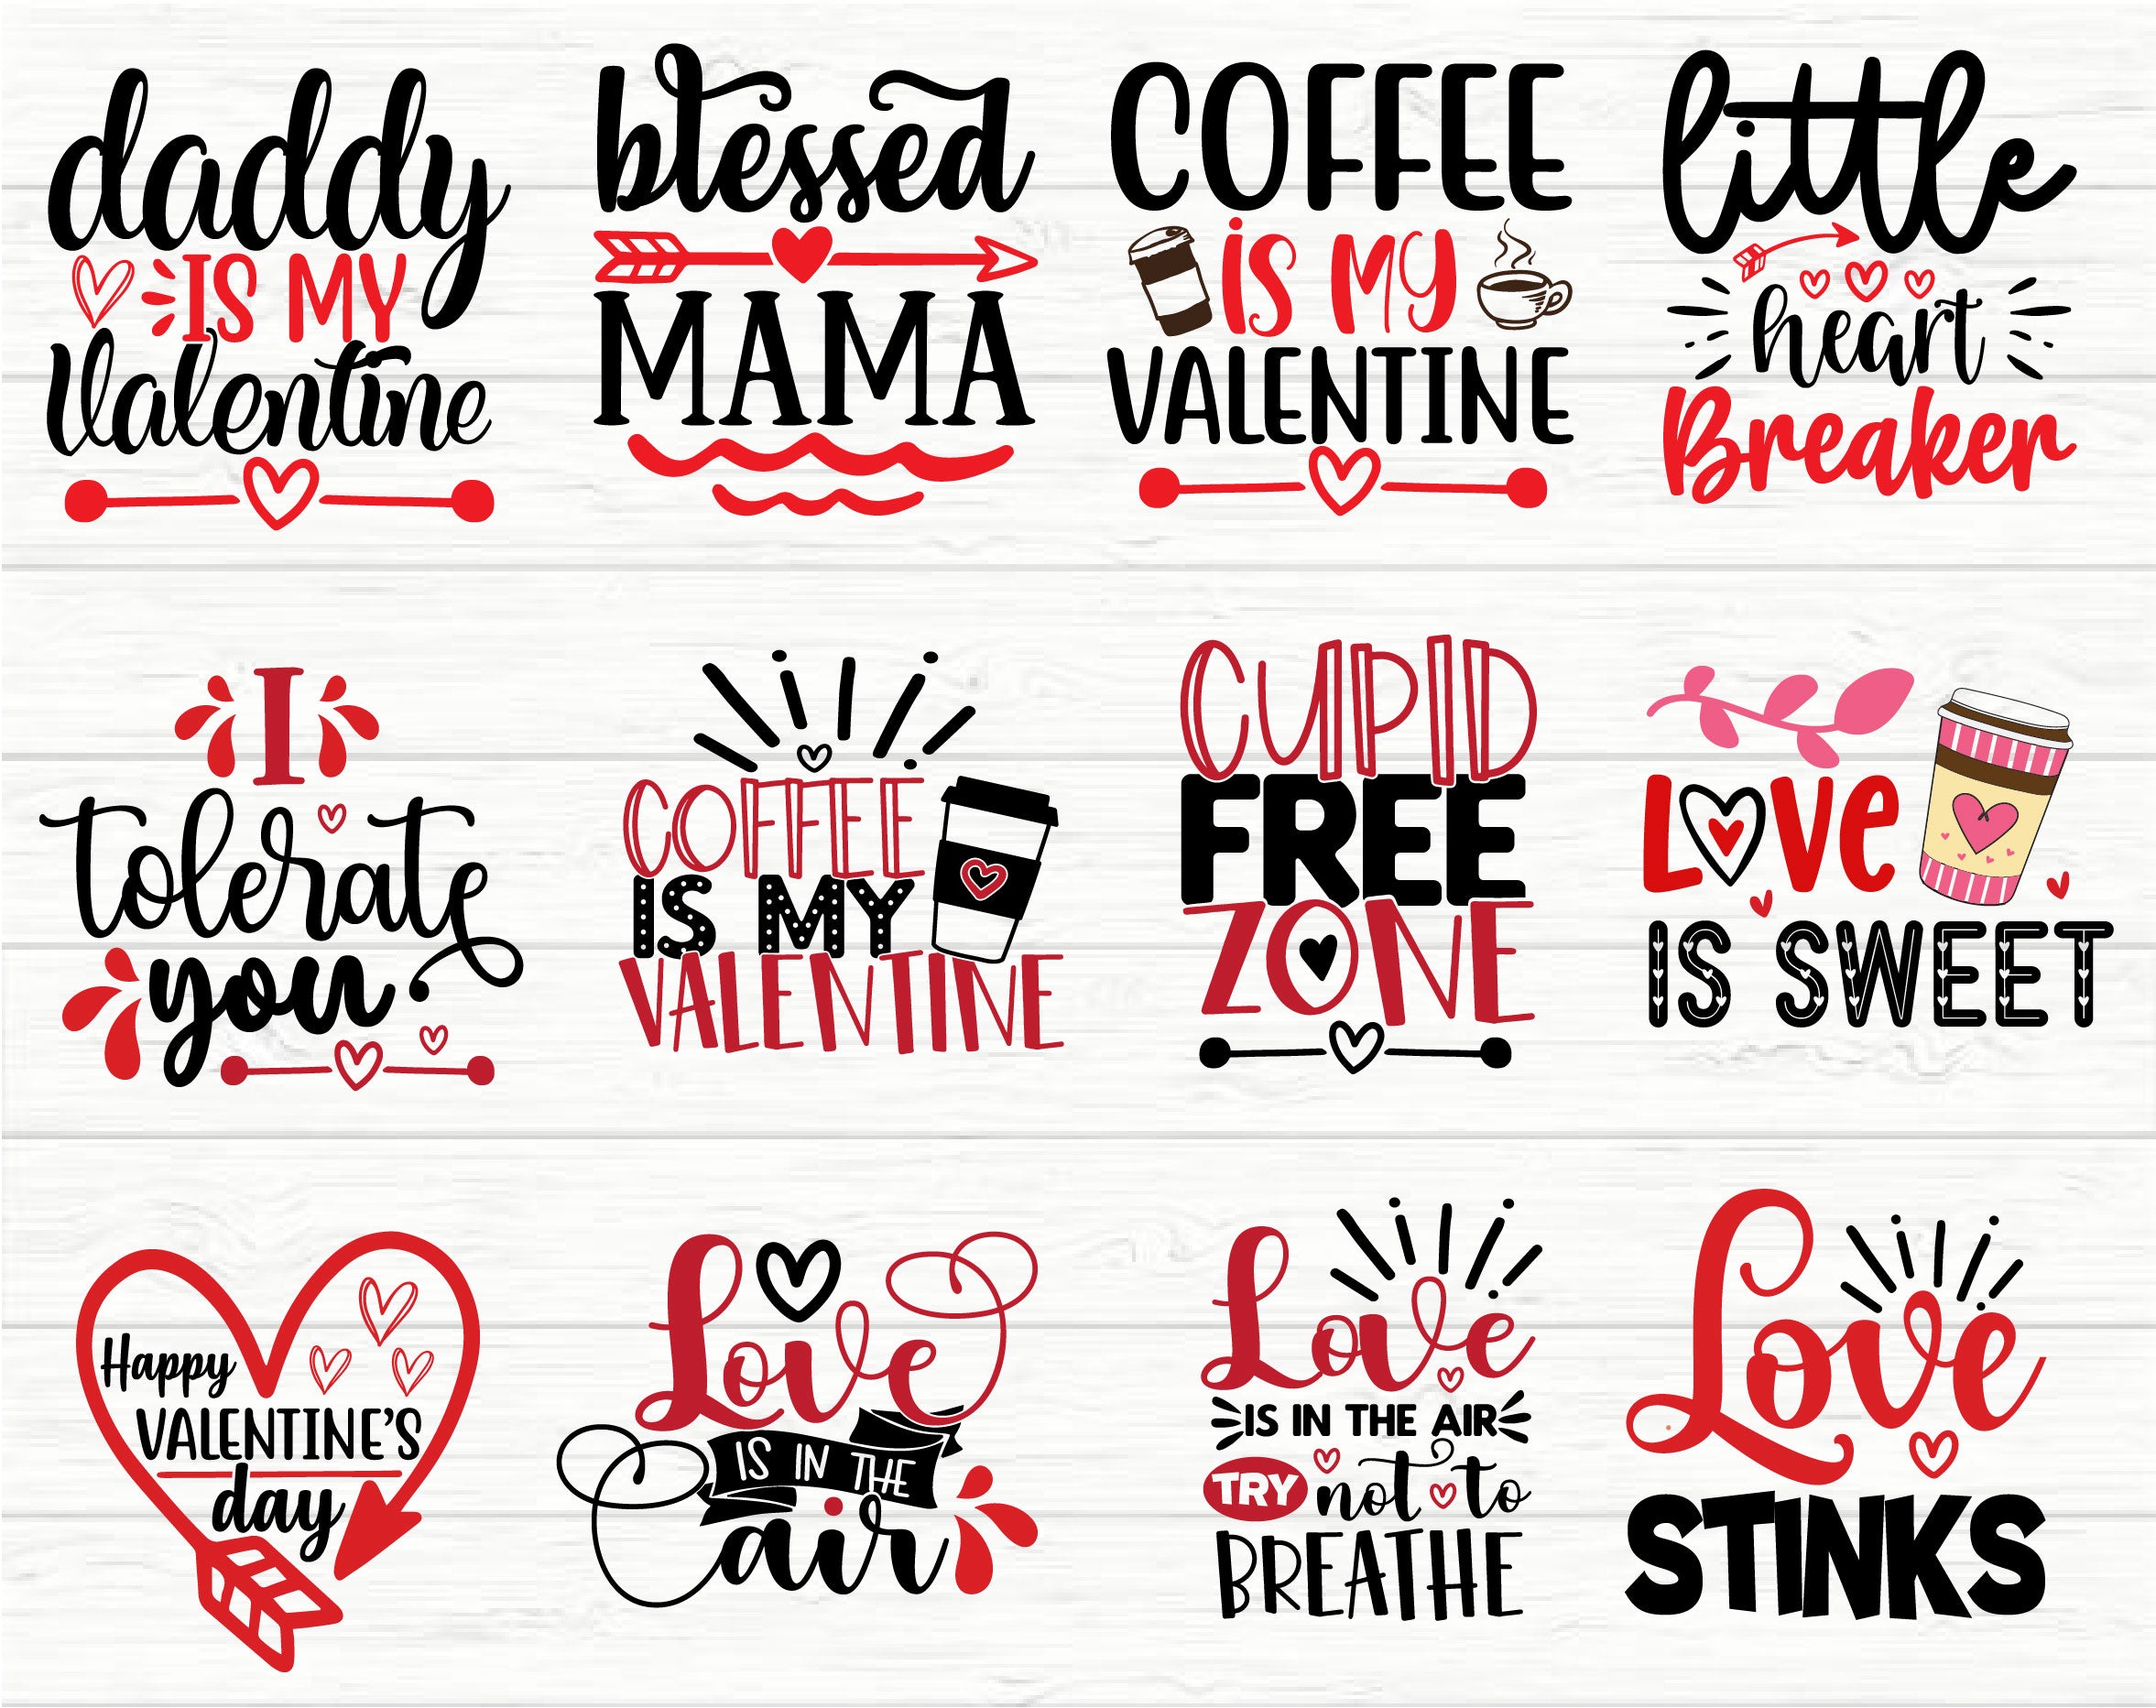 50 Valentine's Day Fun SVG PNG and more files for any sweetie including you!